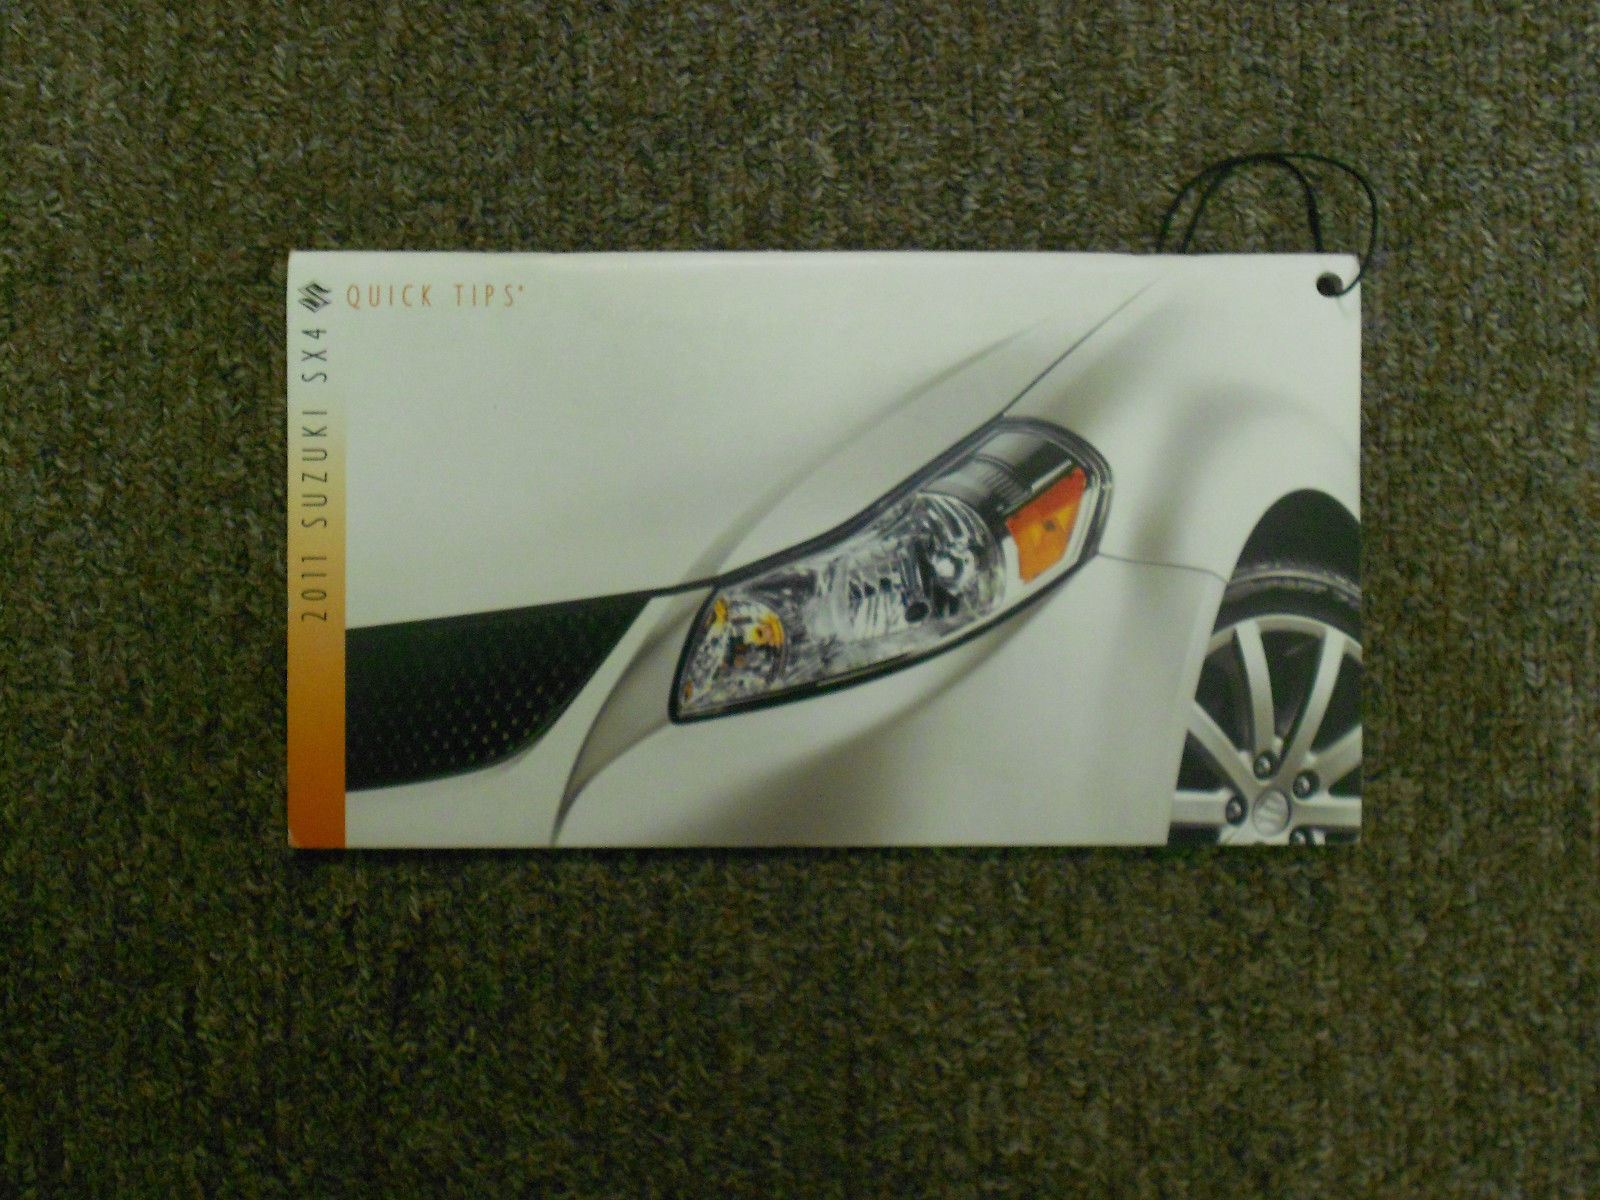 2011 SUZUKI SX4 Quick Tips Guide Pamphlet FACTORY BOOK 11 DEALERSHIP - $11.89